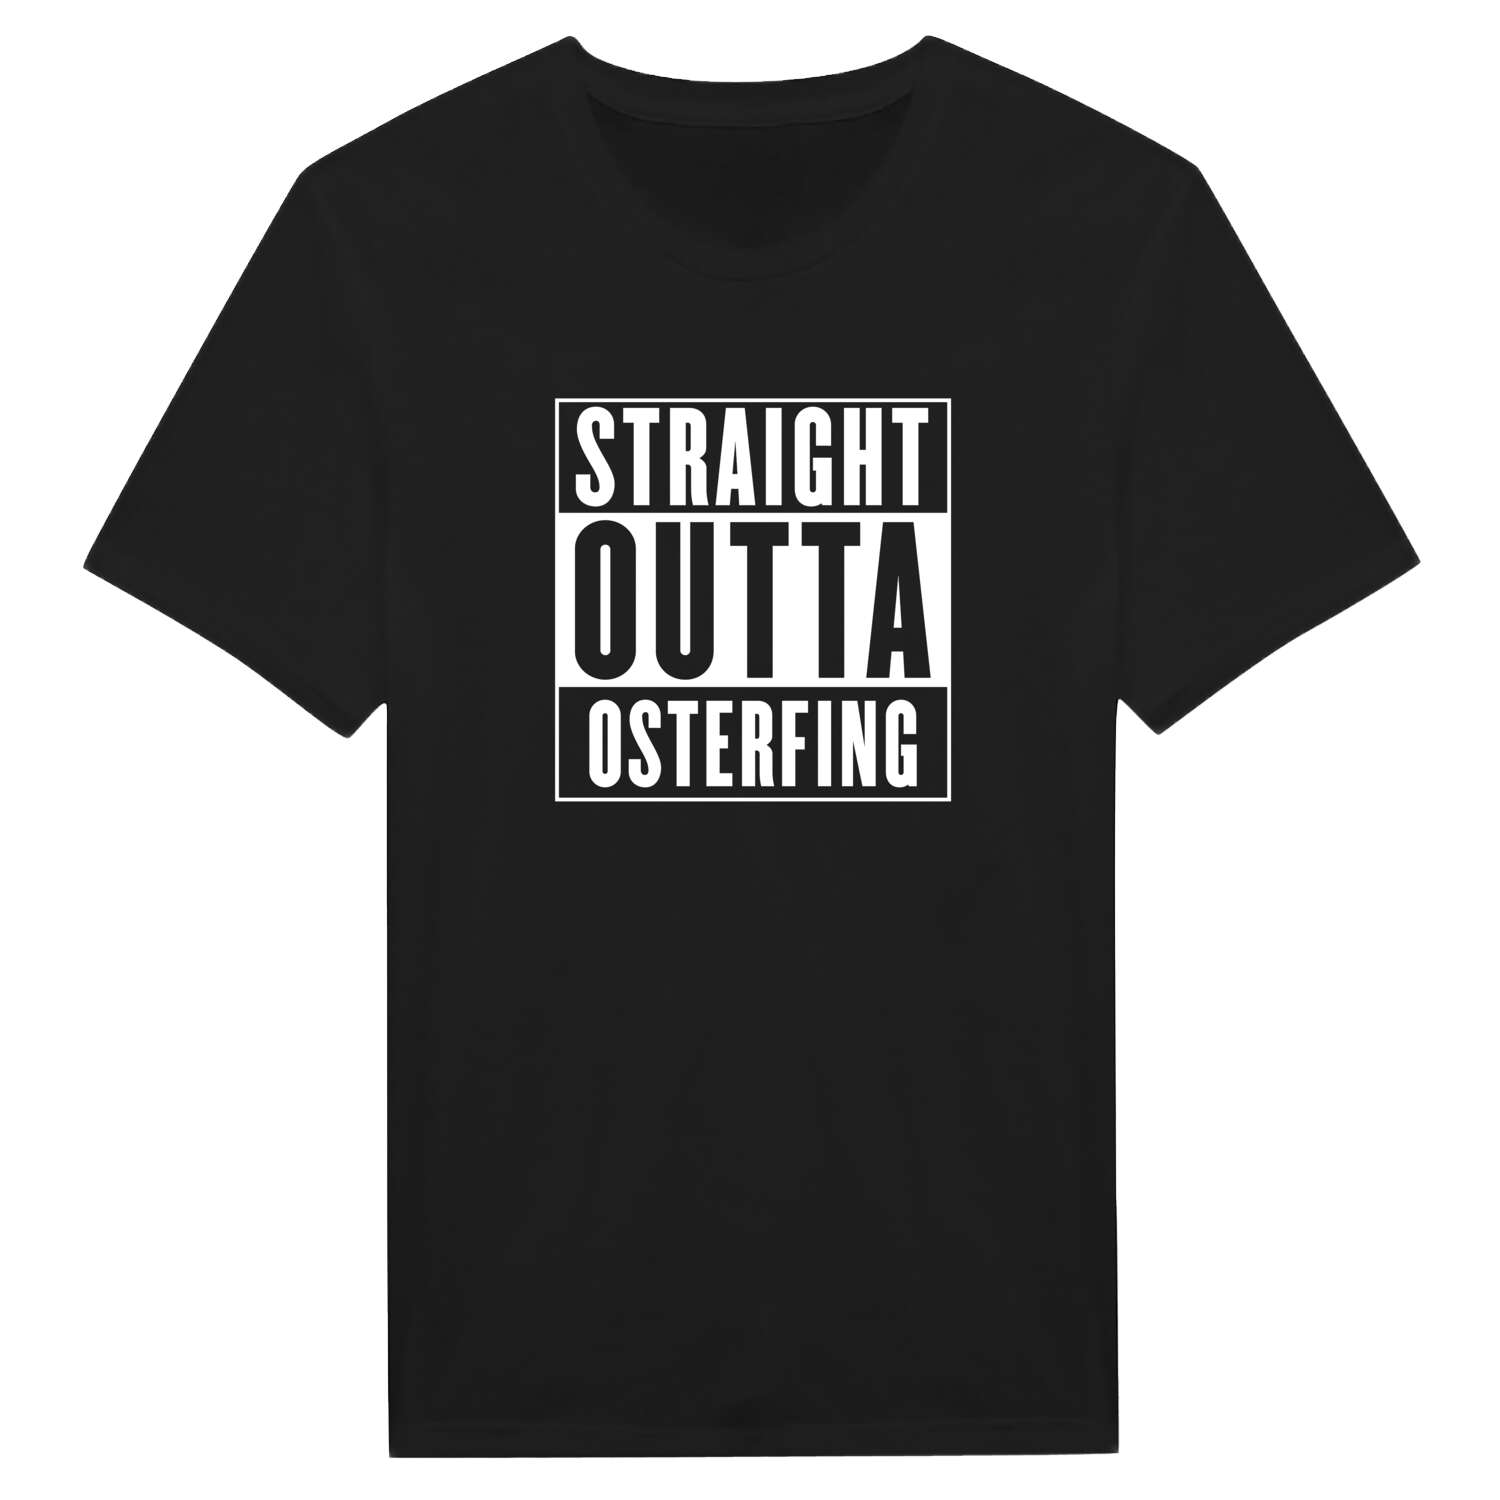 Osterfing T-Shirt »Straight Outta«